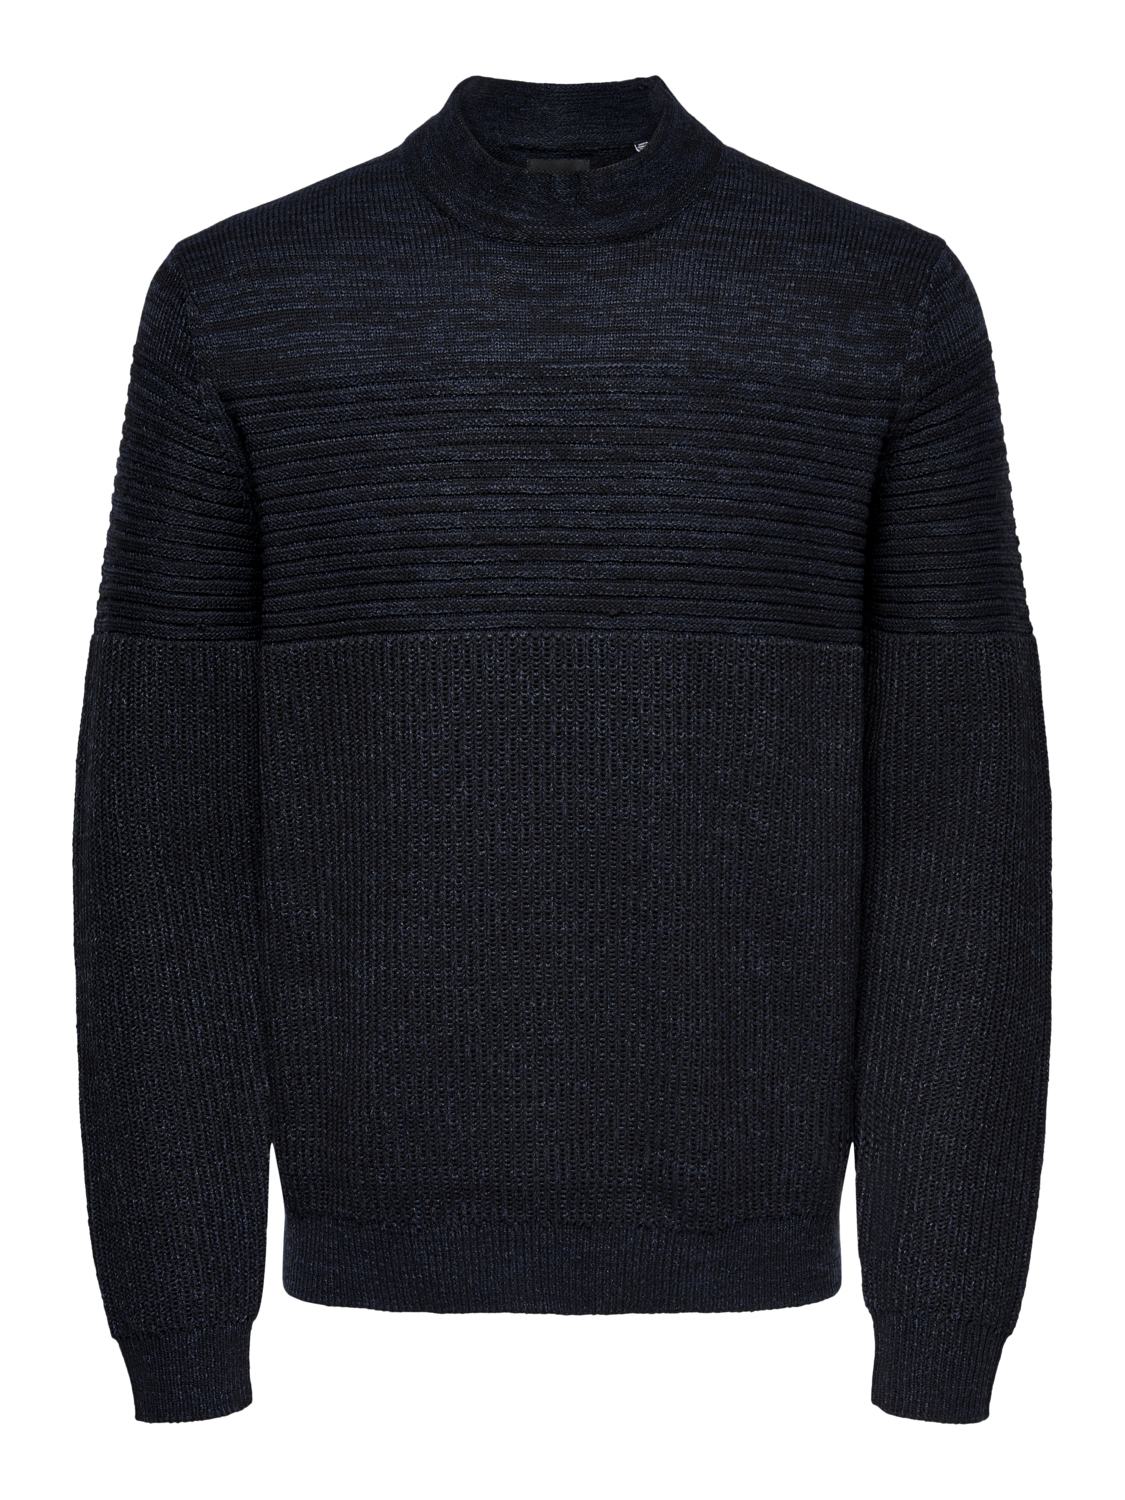 ONLY&SONS MOCK NECK SWEATER - Anthonys Fashion